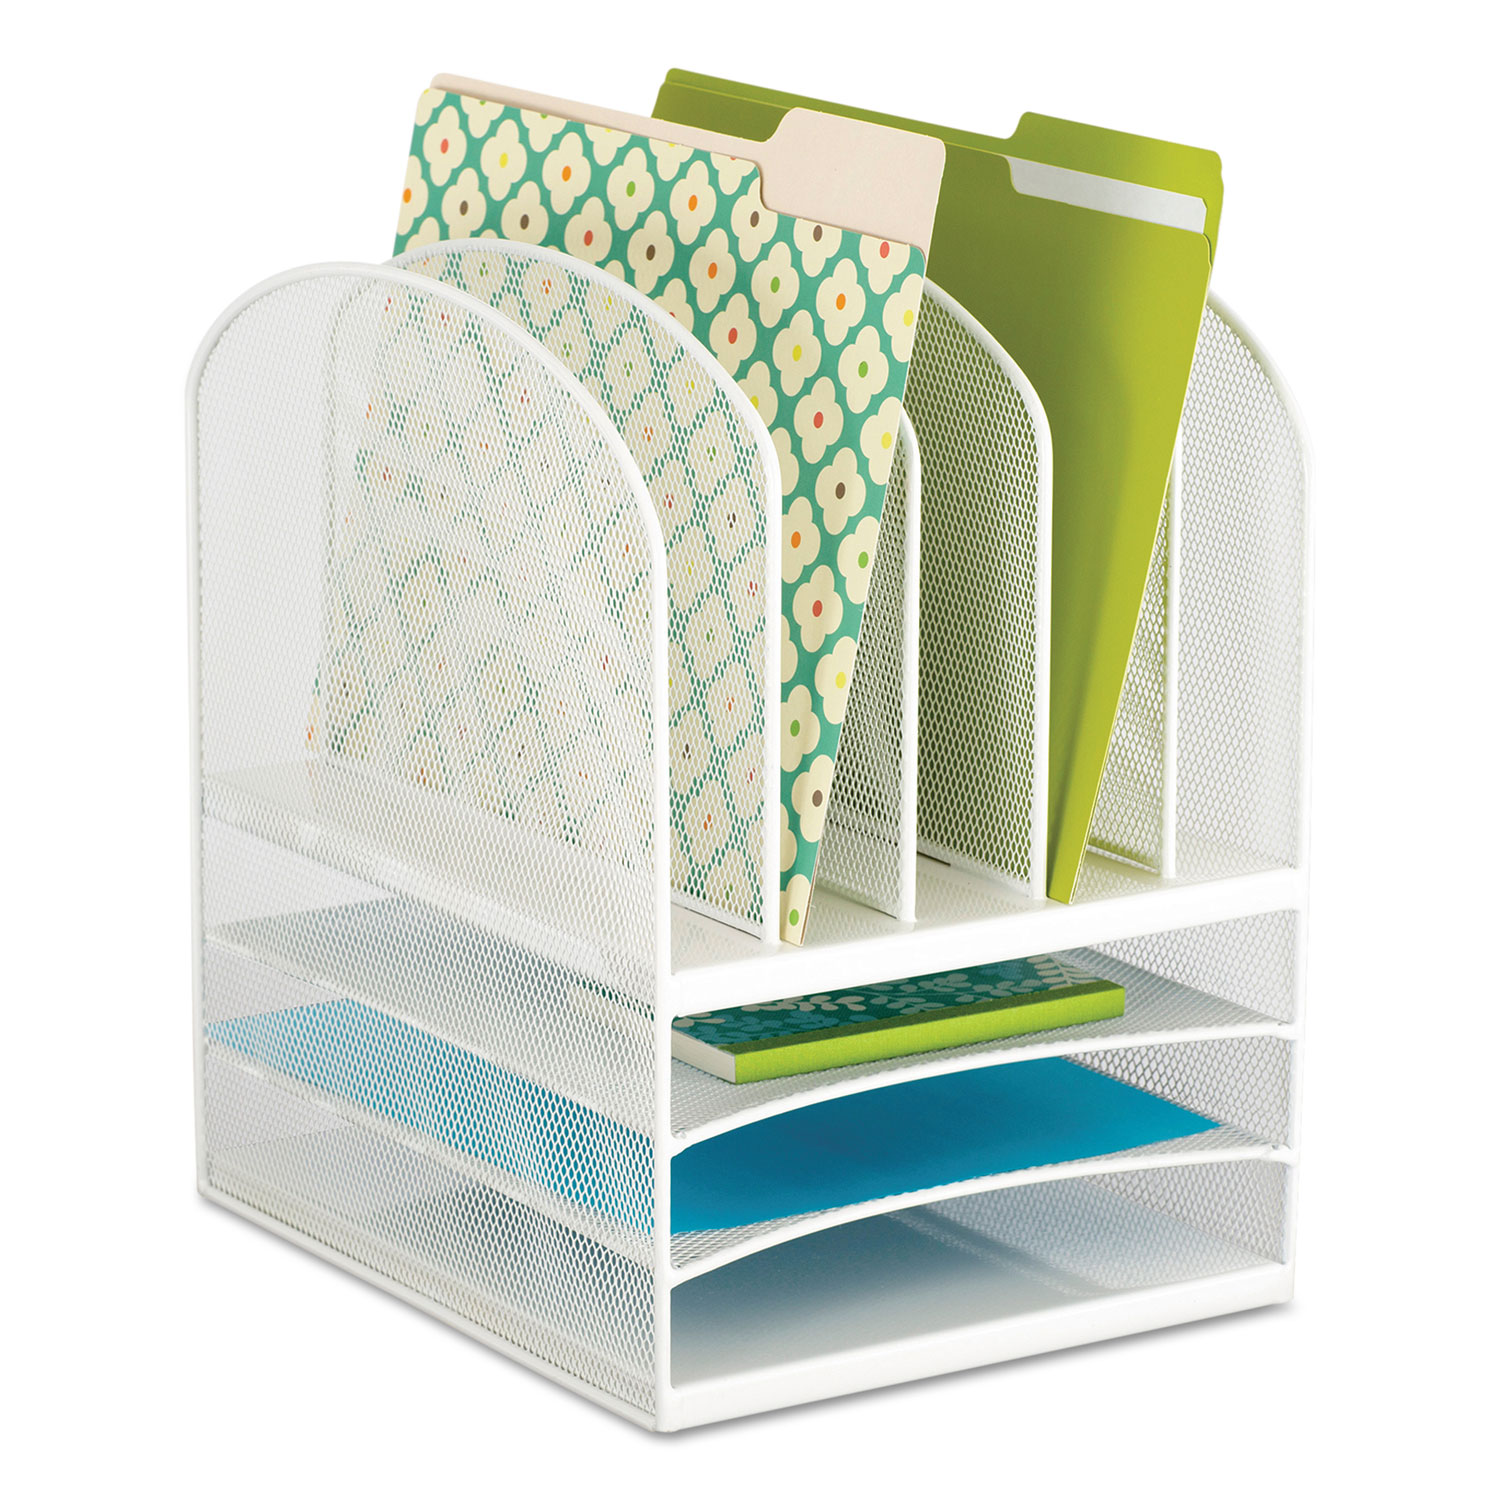  Safco 3266WH Onyx Mesh Desk Organizer with Five Vertical and Three Horizontal Sections, Letter Size Files, 11.5 x 9.5 x 13, White (SAF3266WH) 